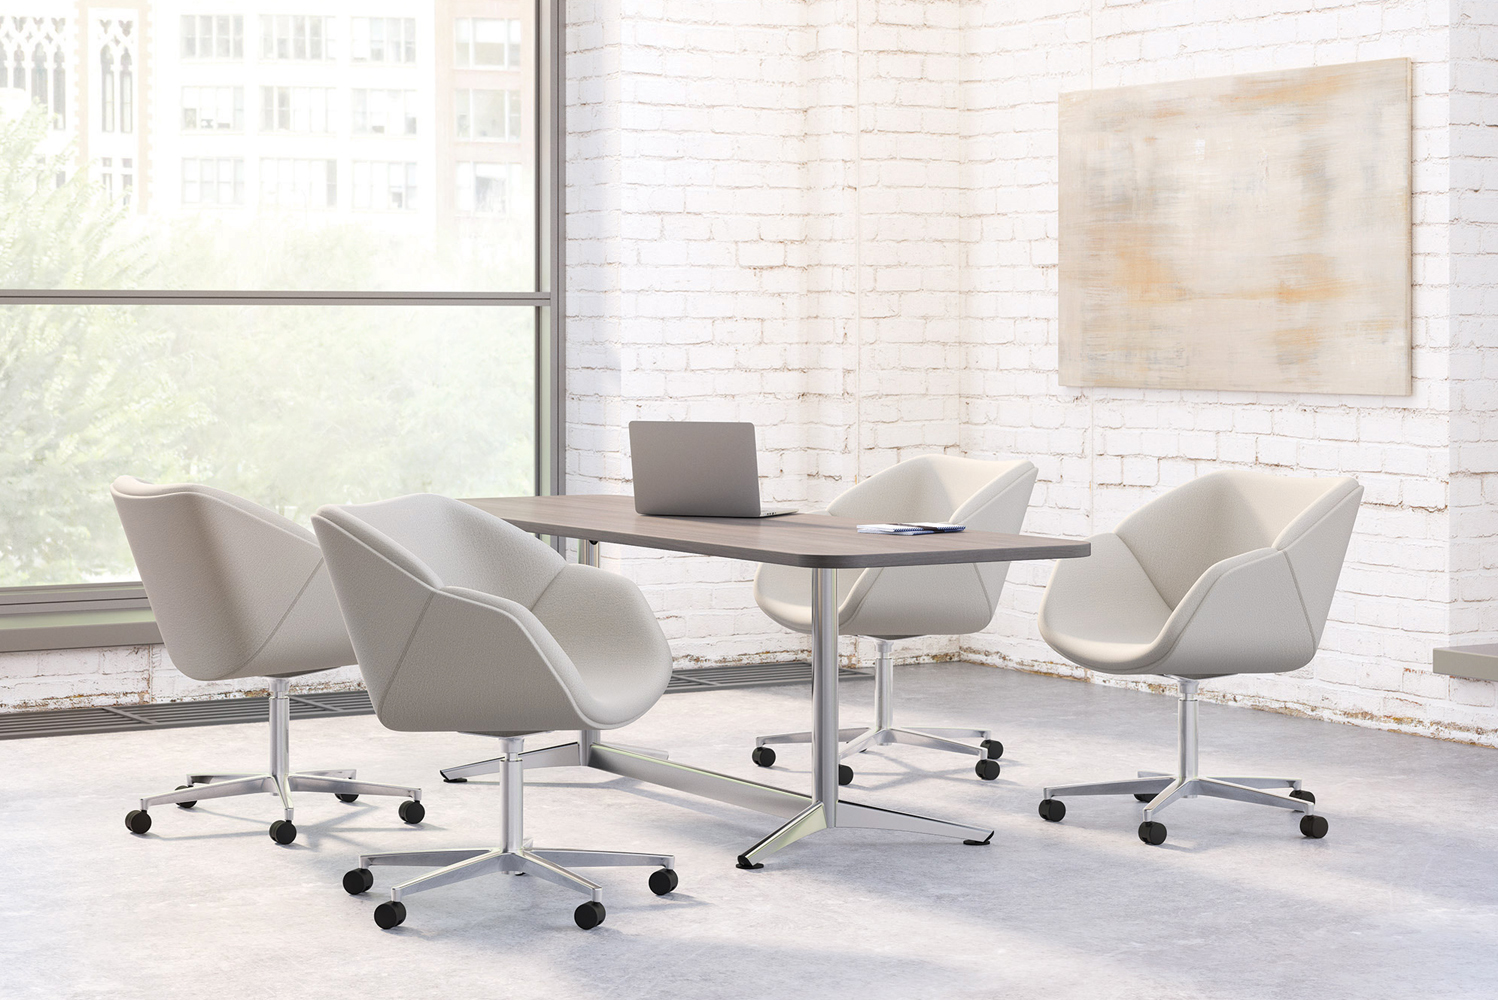 National Office Furniture launched Delgado